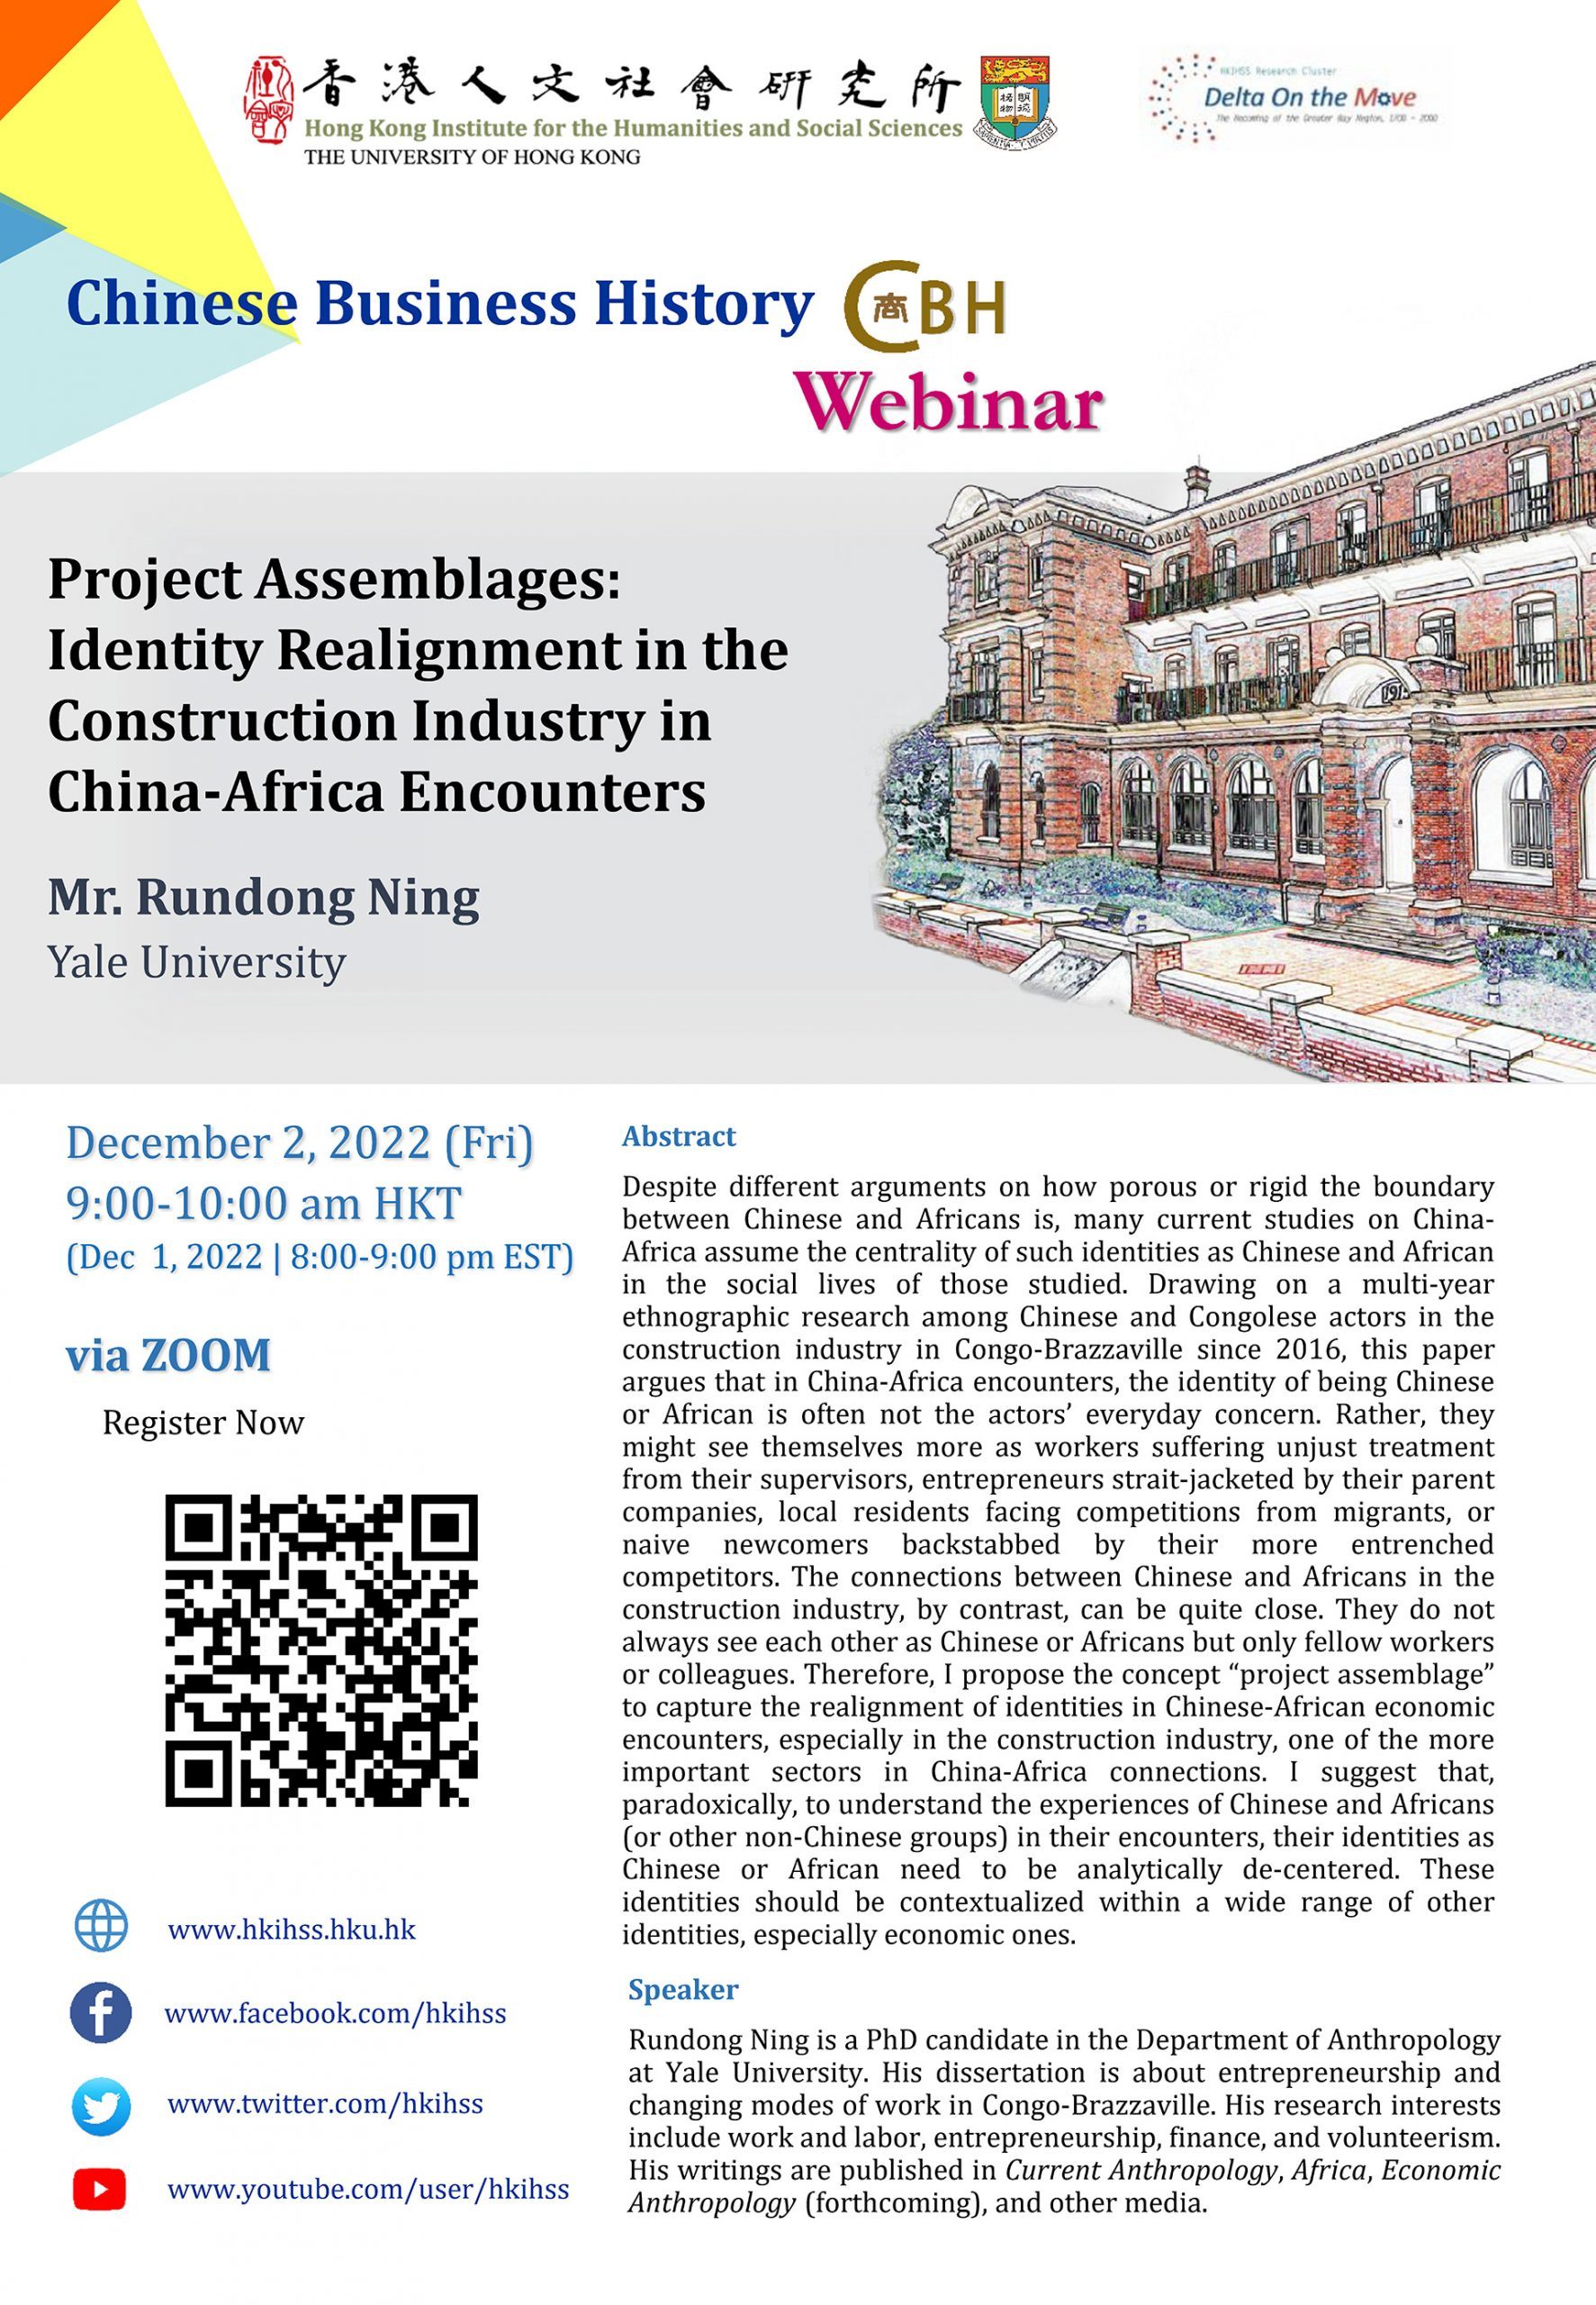 Chinese Business History Webinar on “Project Assemblages: Identity Realignment in the Construction Industry in China-Africa Encounters” by Mr. Rundong Ning (December 2, 2022)